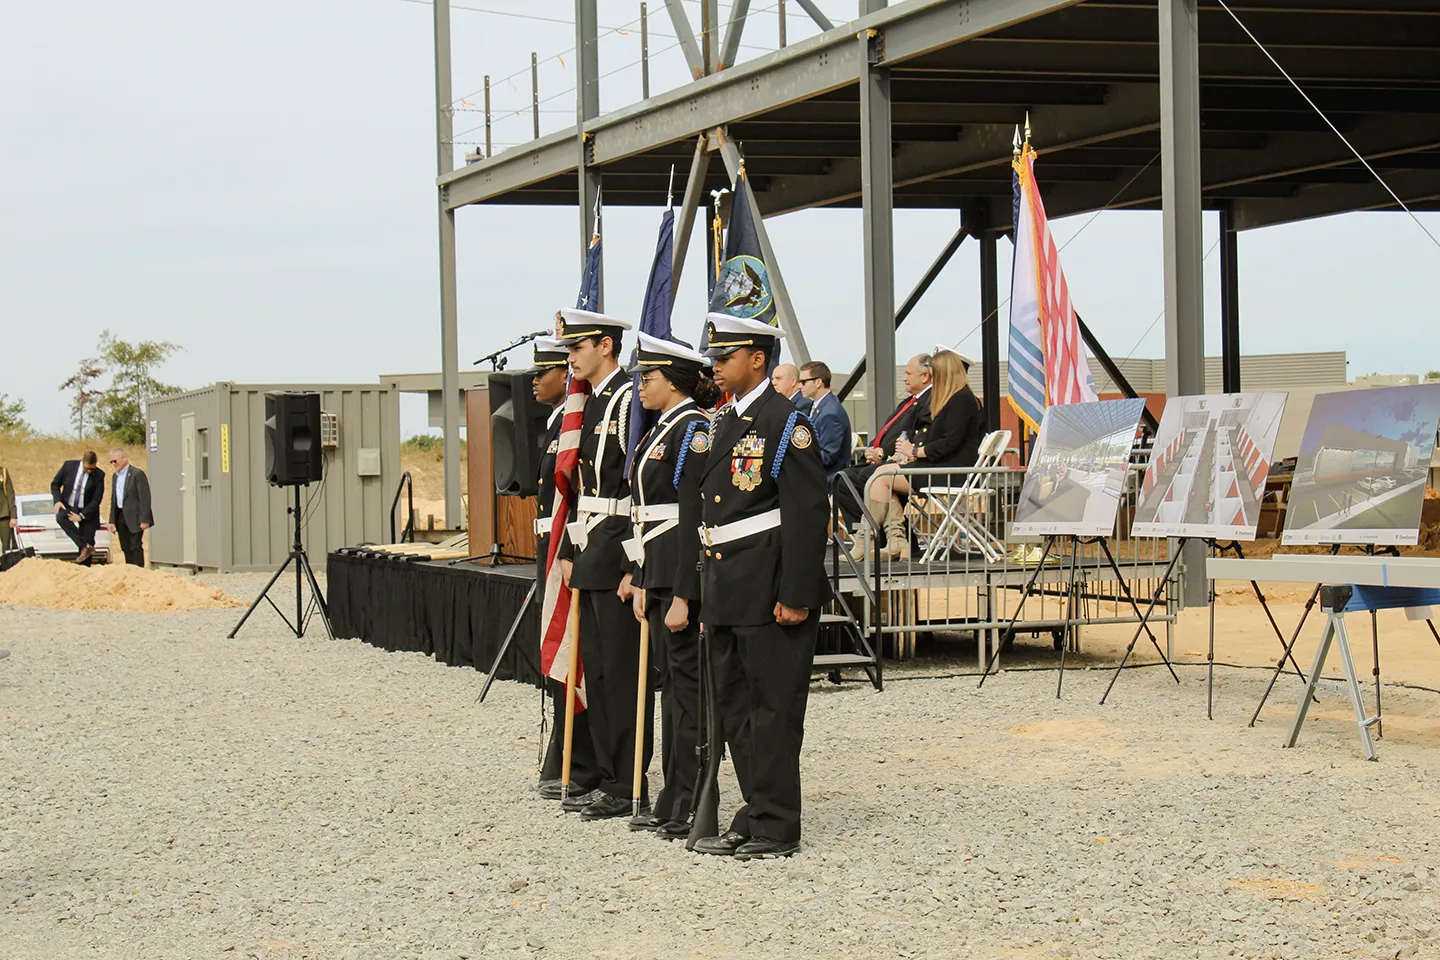 The George Washington High School Navy JROTC unit presents the nation’s colors at the groundbreaking event.